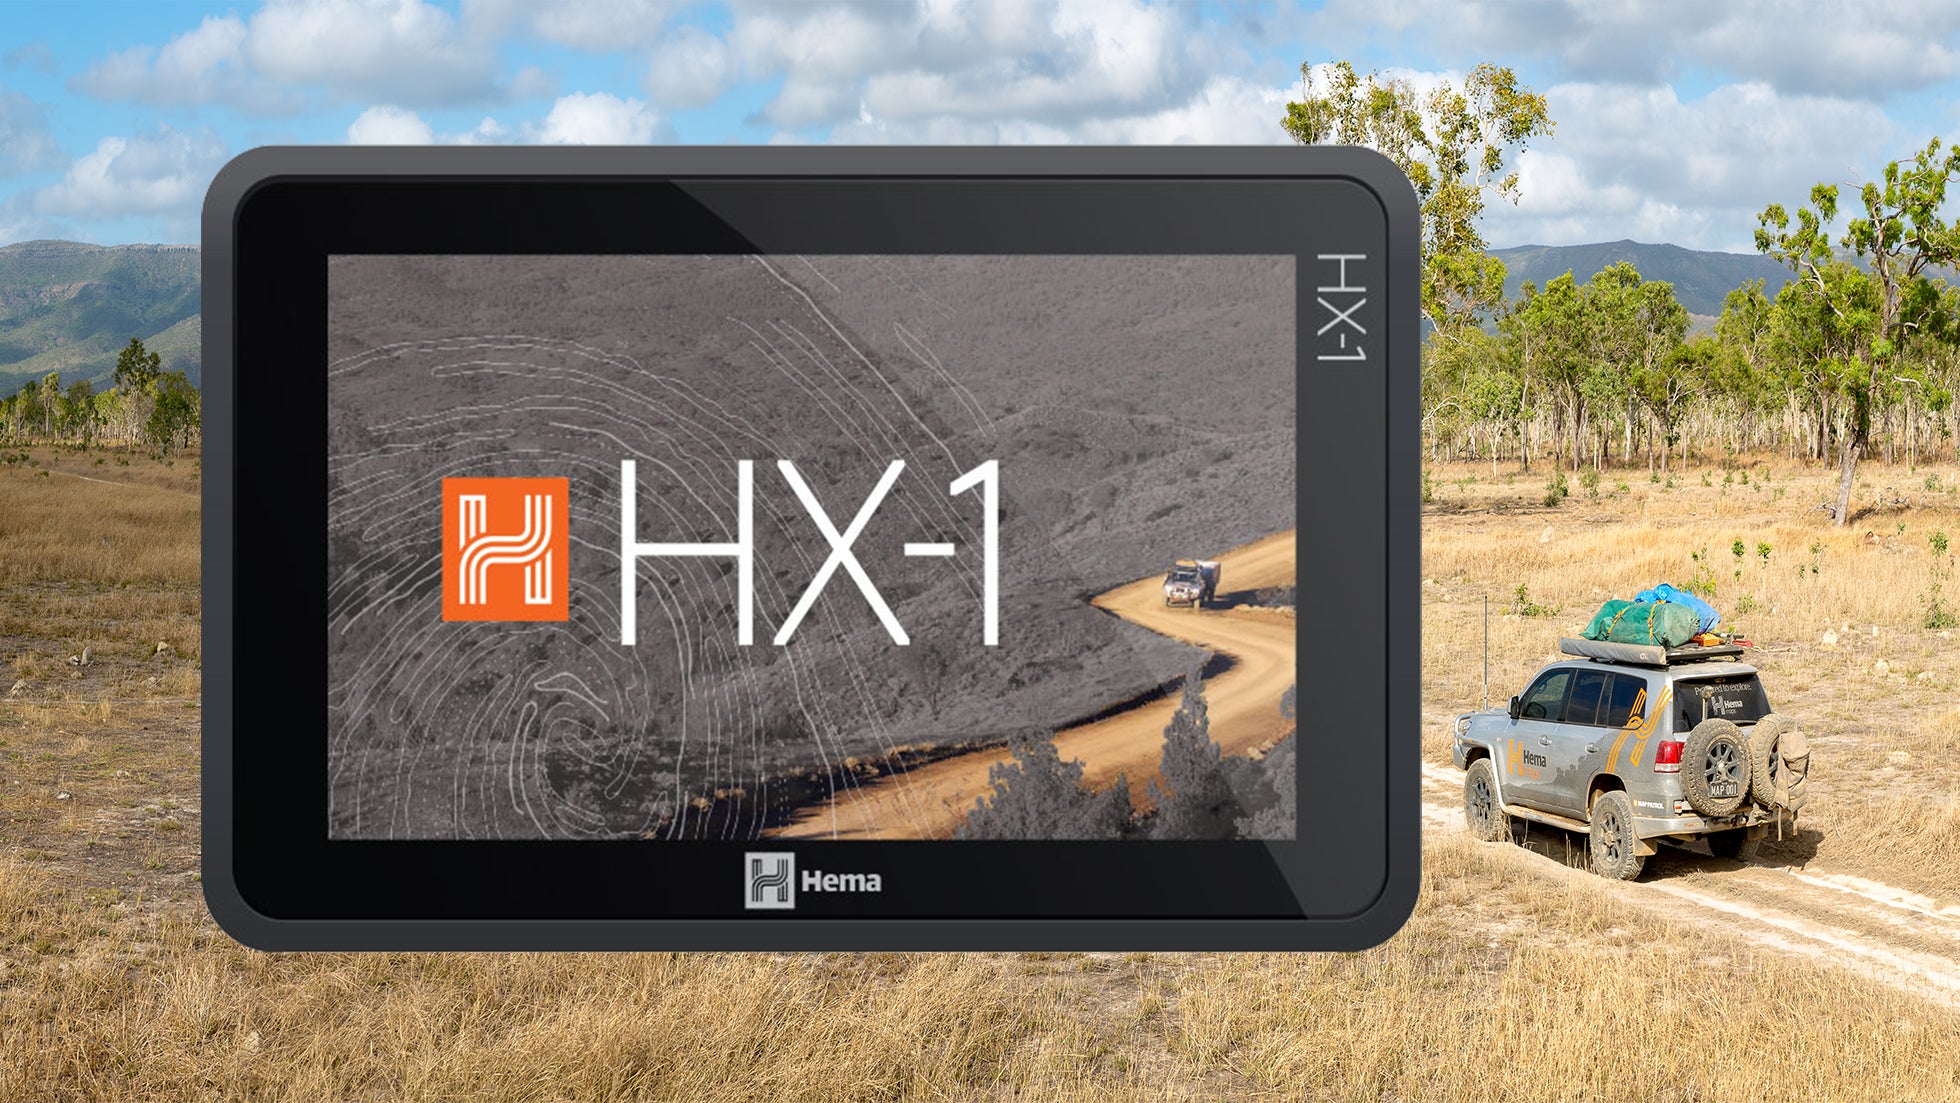 Frequently asked questions for the Hema Navigator HX-1